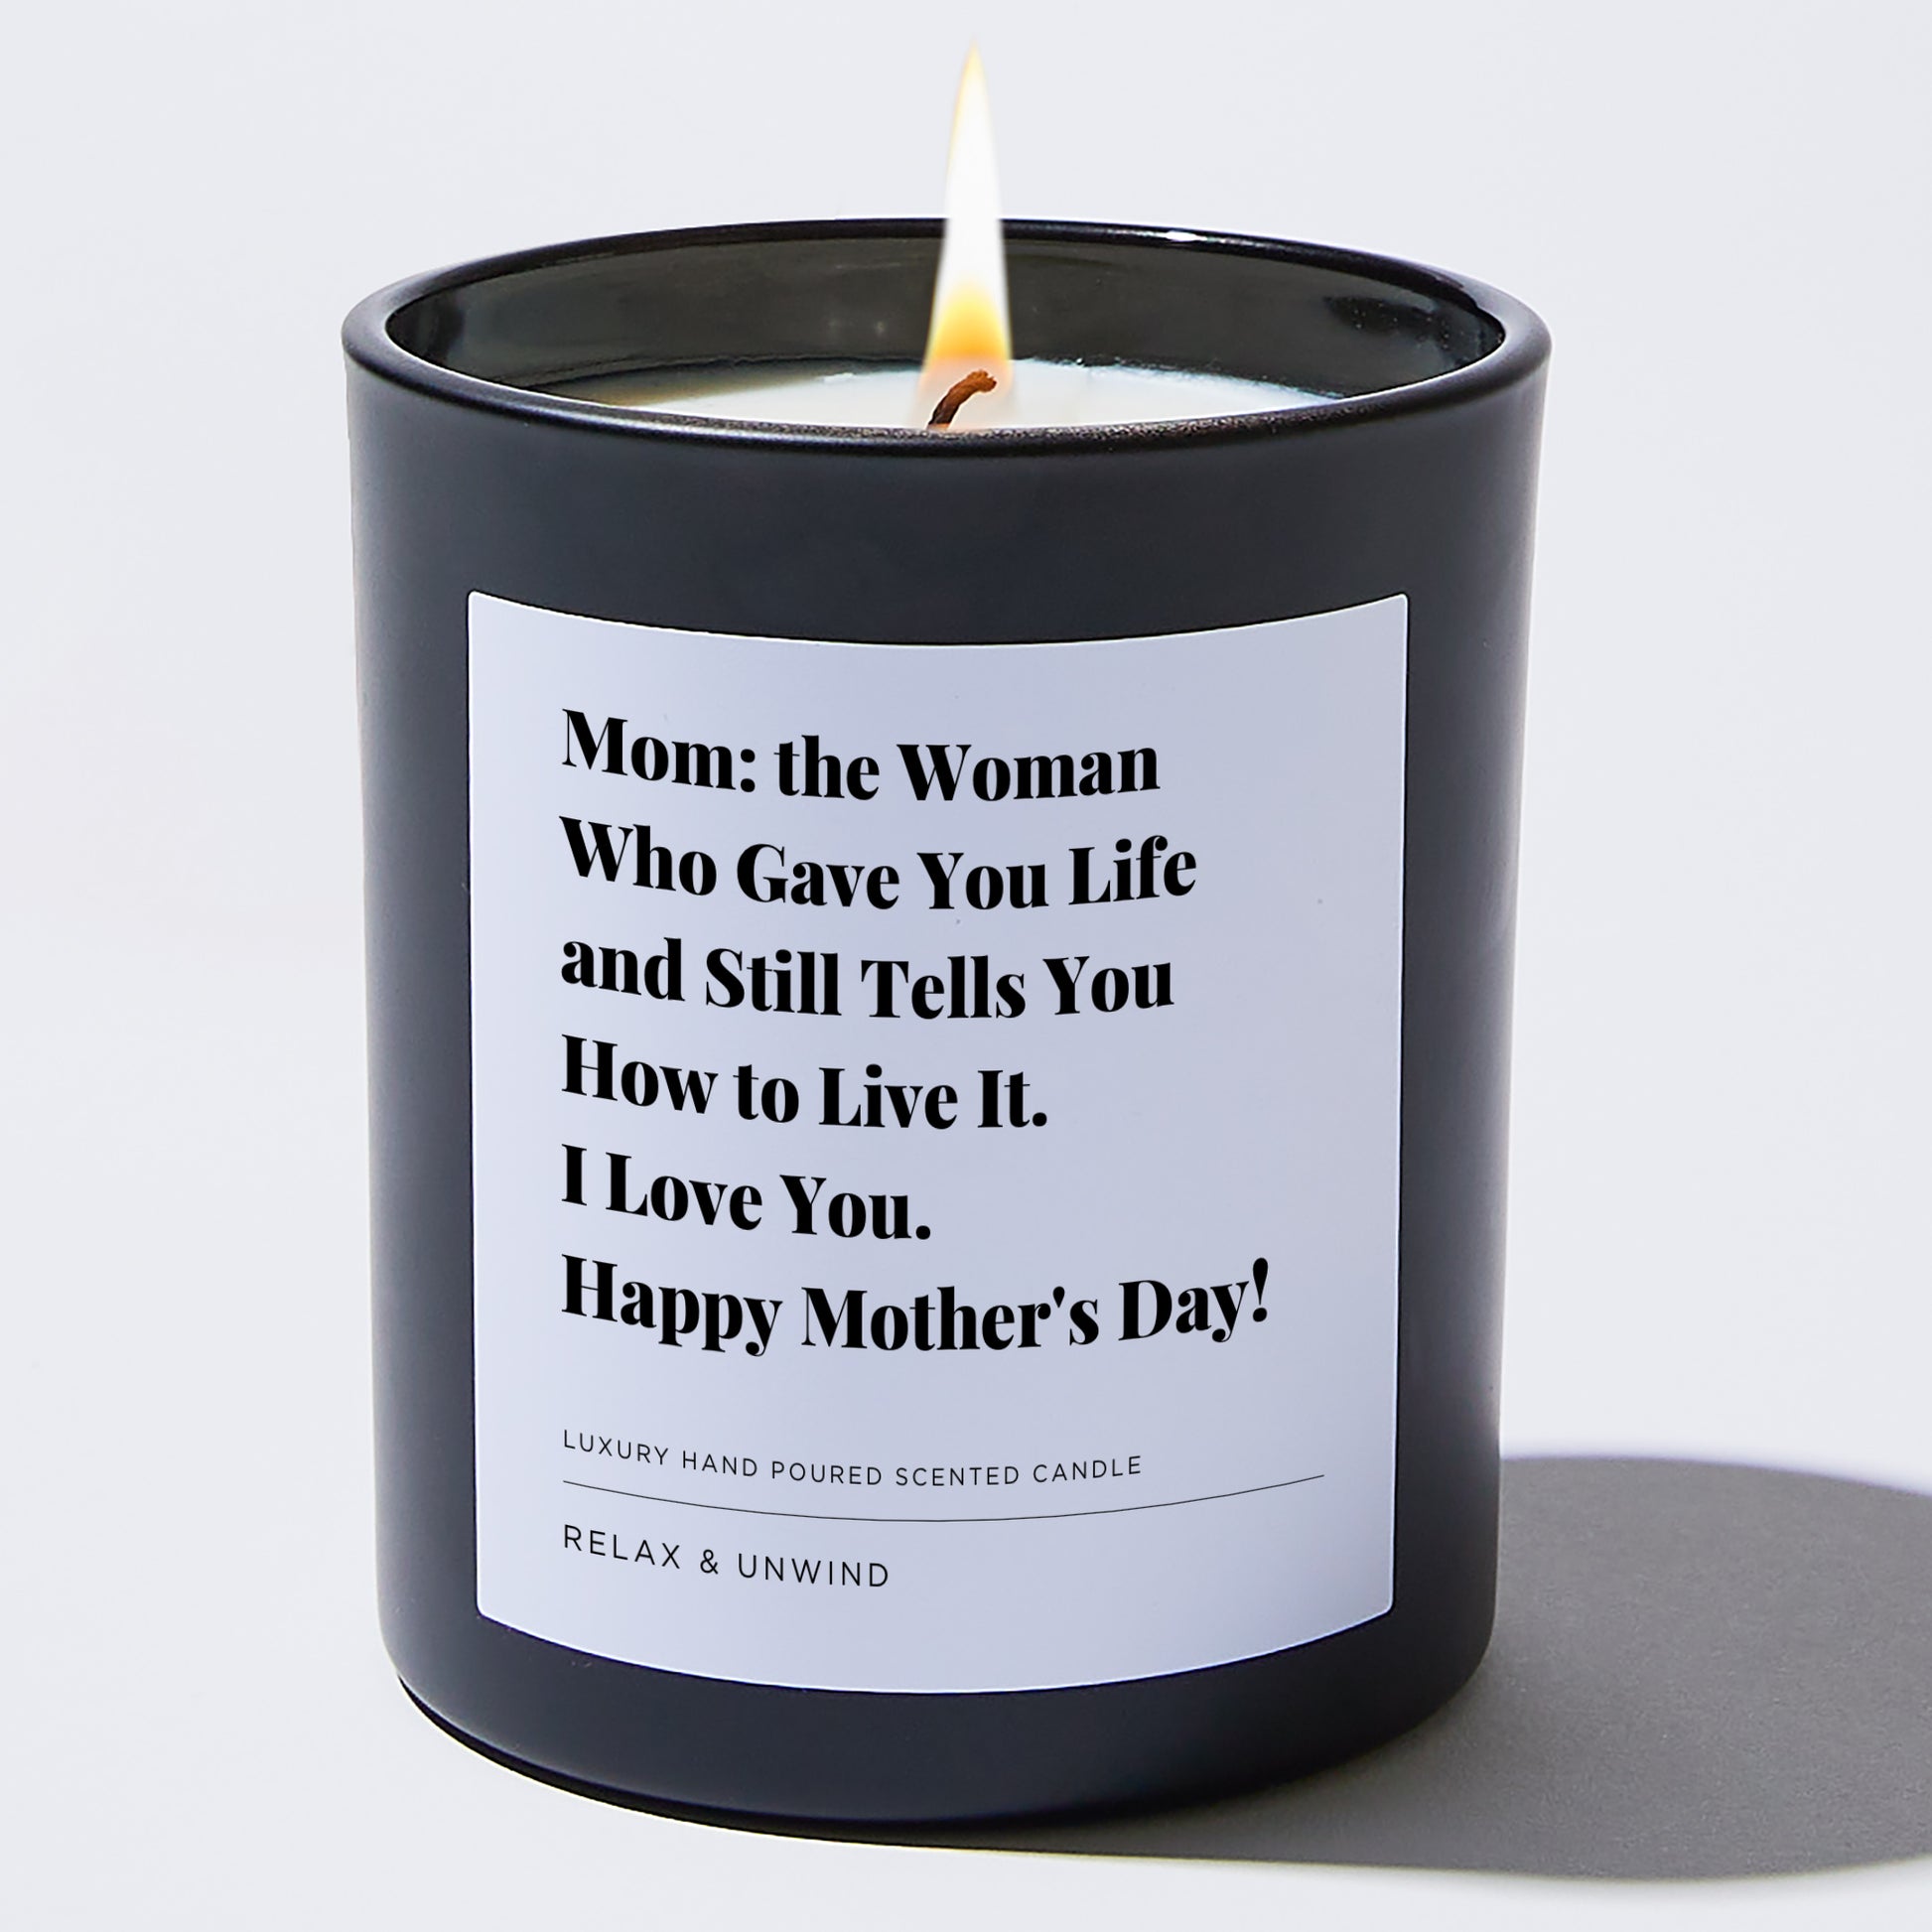 Gift for Mom Mom: the woman who gave you life and still tells you how to live it. I Love You. Happy Mother's Day!